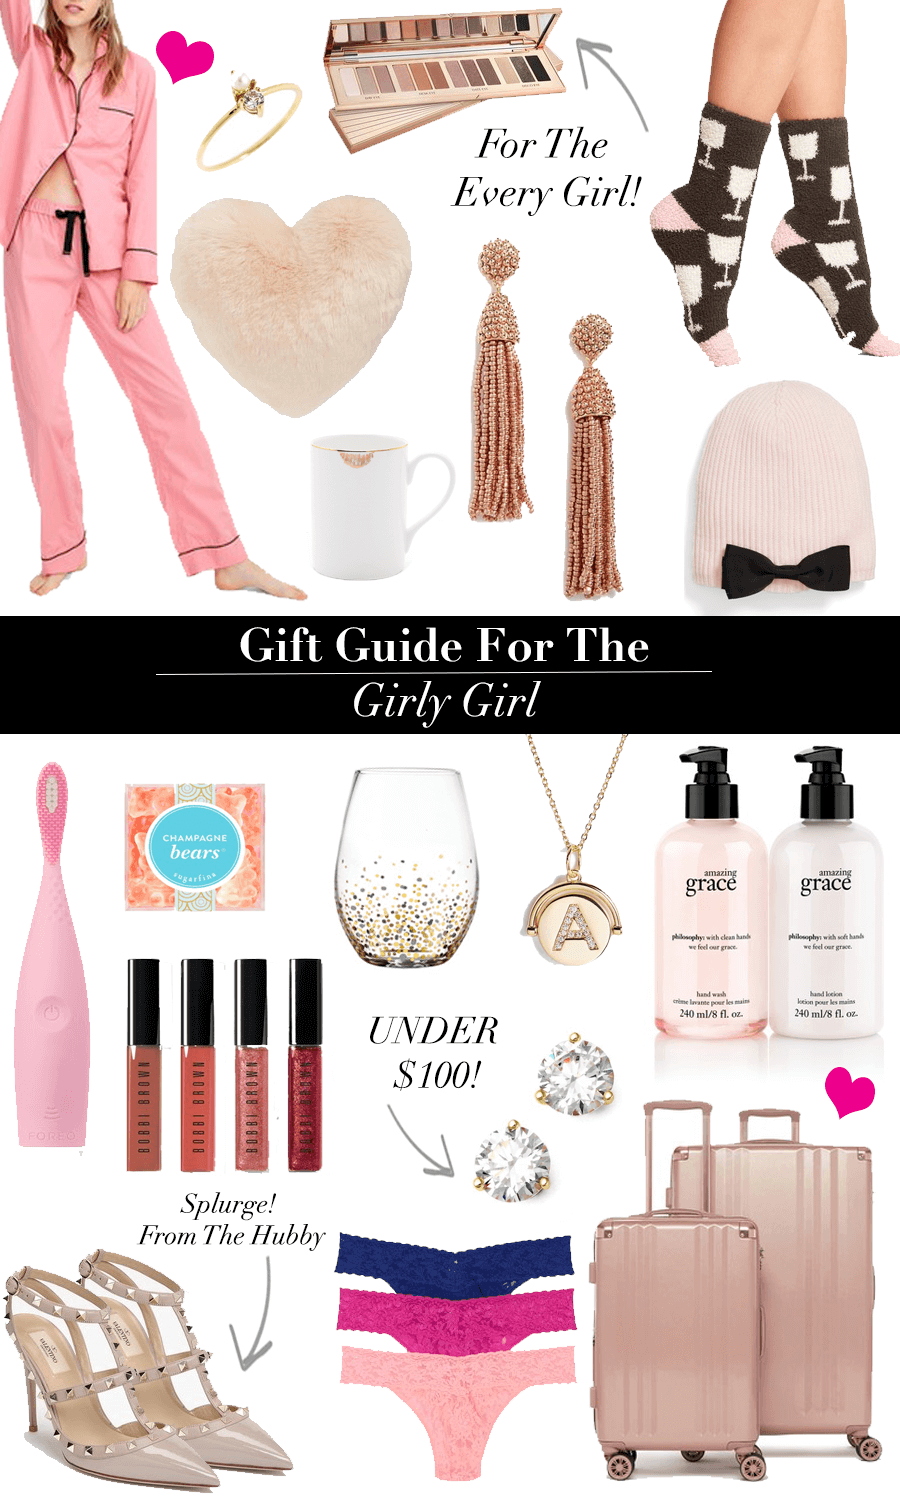 Holiday Gift Guide: Christmas Gift Ideas for Everyone On Your List -  GoodTomiCha